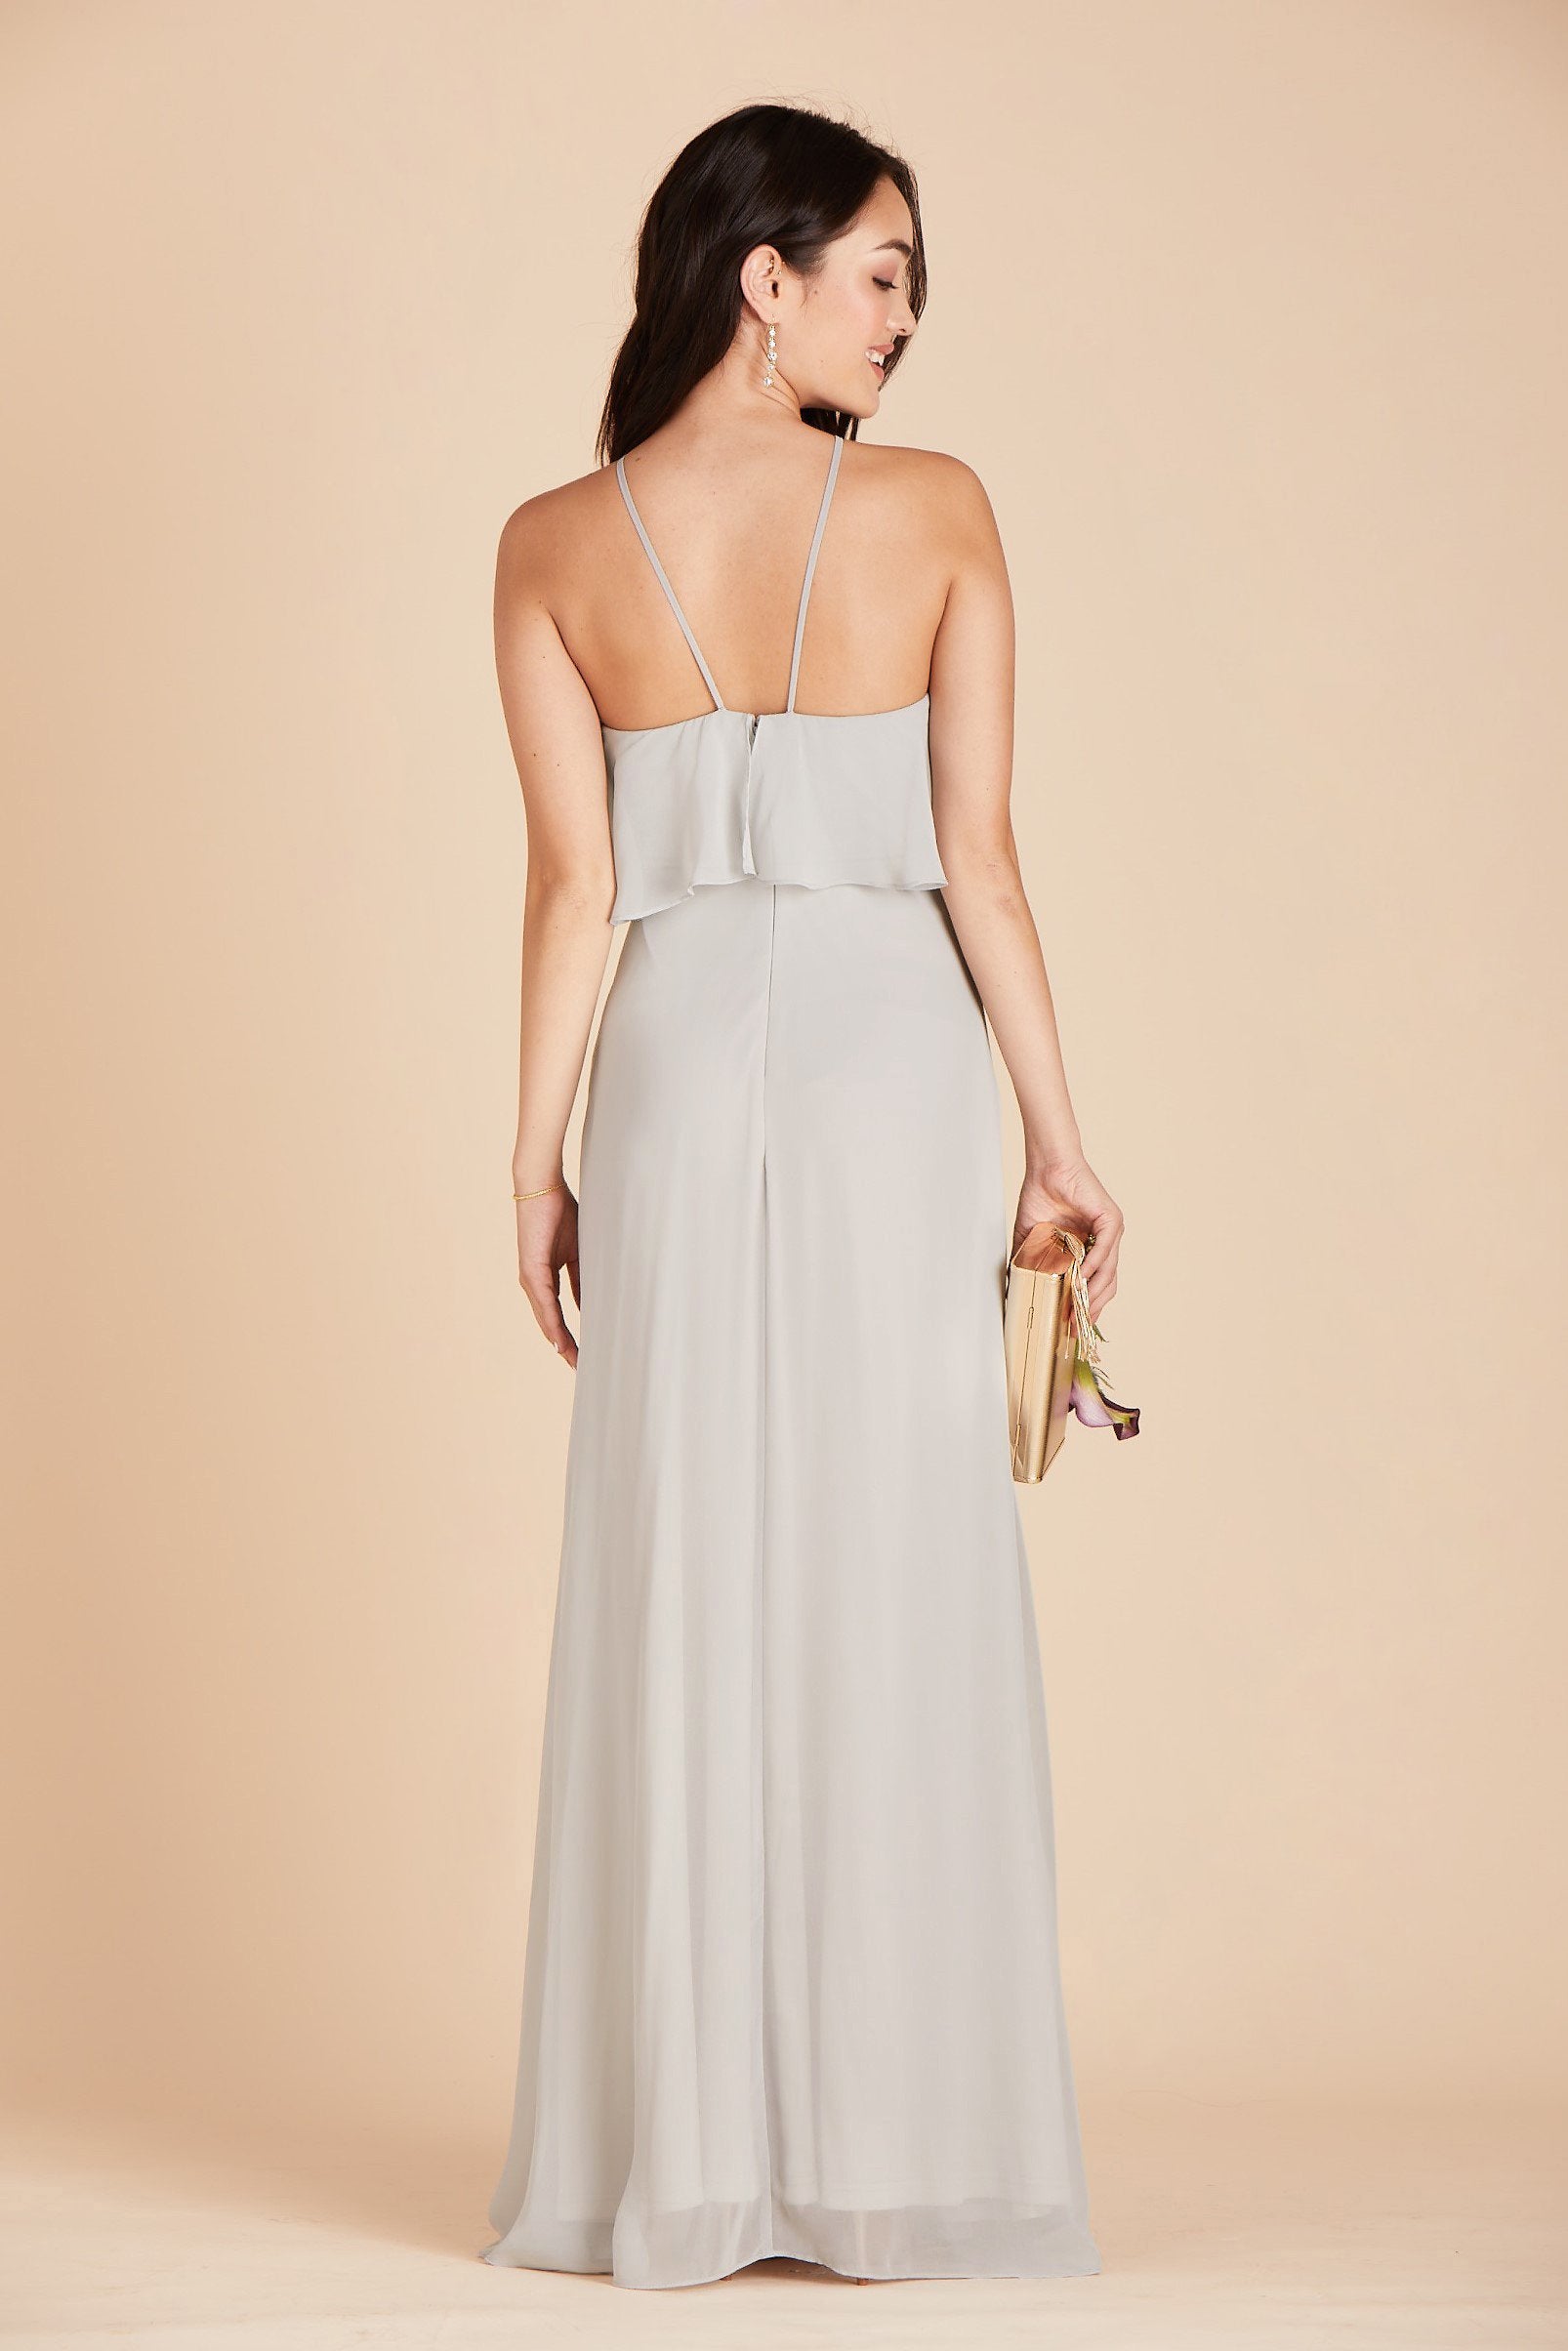 Jules bridesmaid dress in dove gray chiffon by Birdy Grey, back view